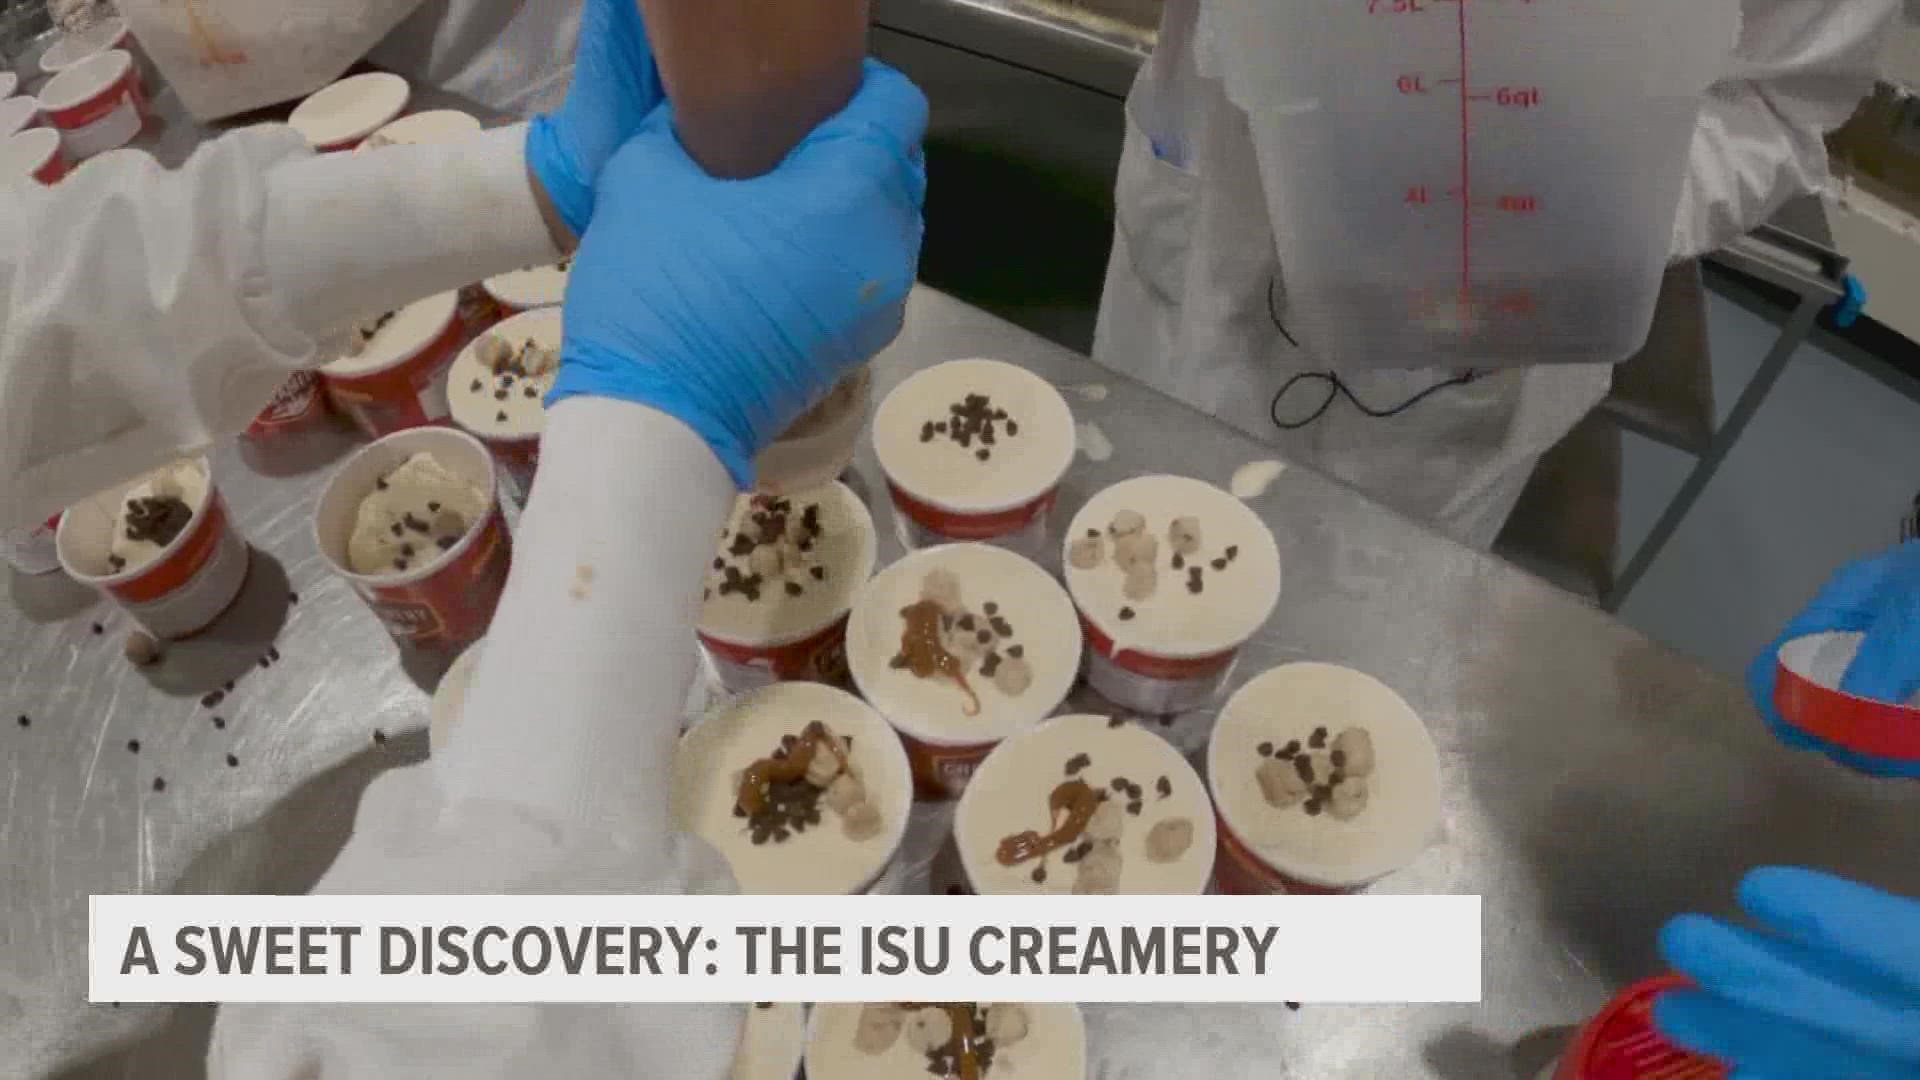 Local 5's "Good Morning Iowa" team visited ISU to learn more about how ice cream is made.